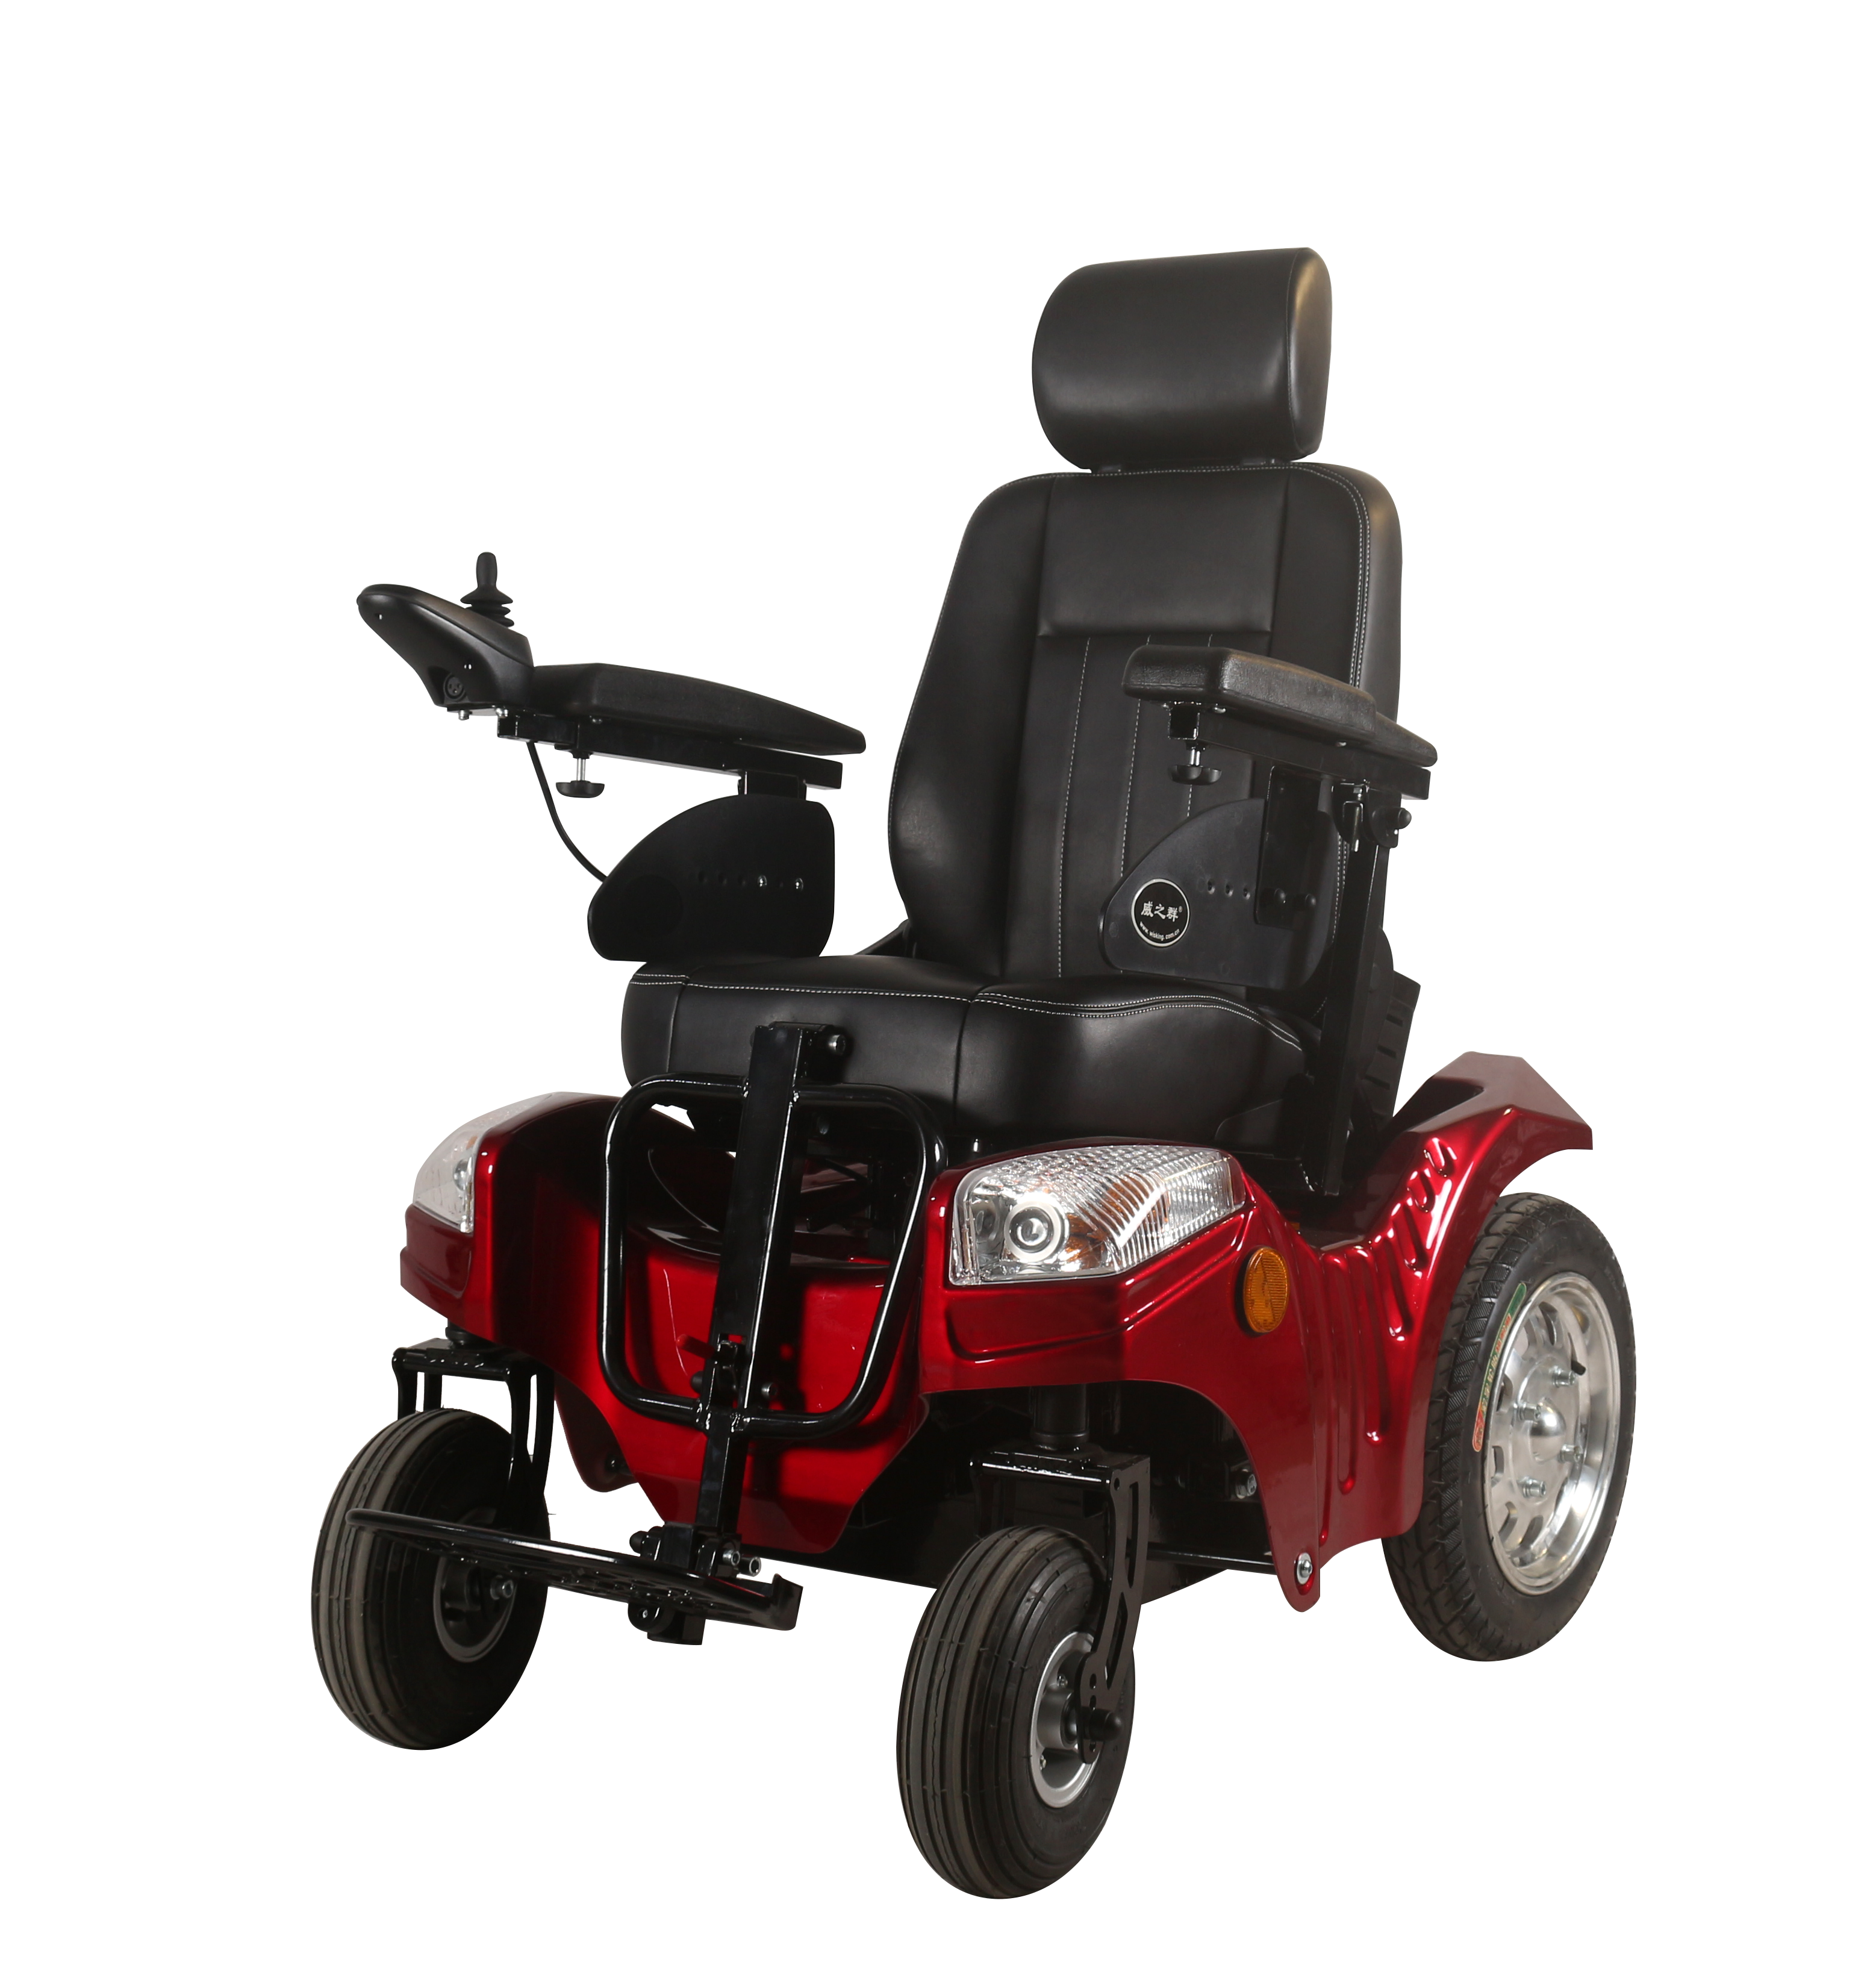 Off-road heavy duty functional power wheelchair for handicapped